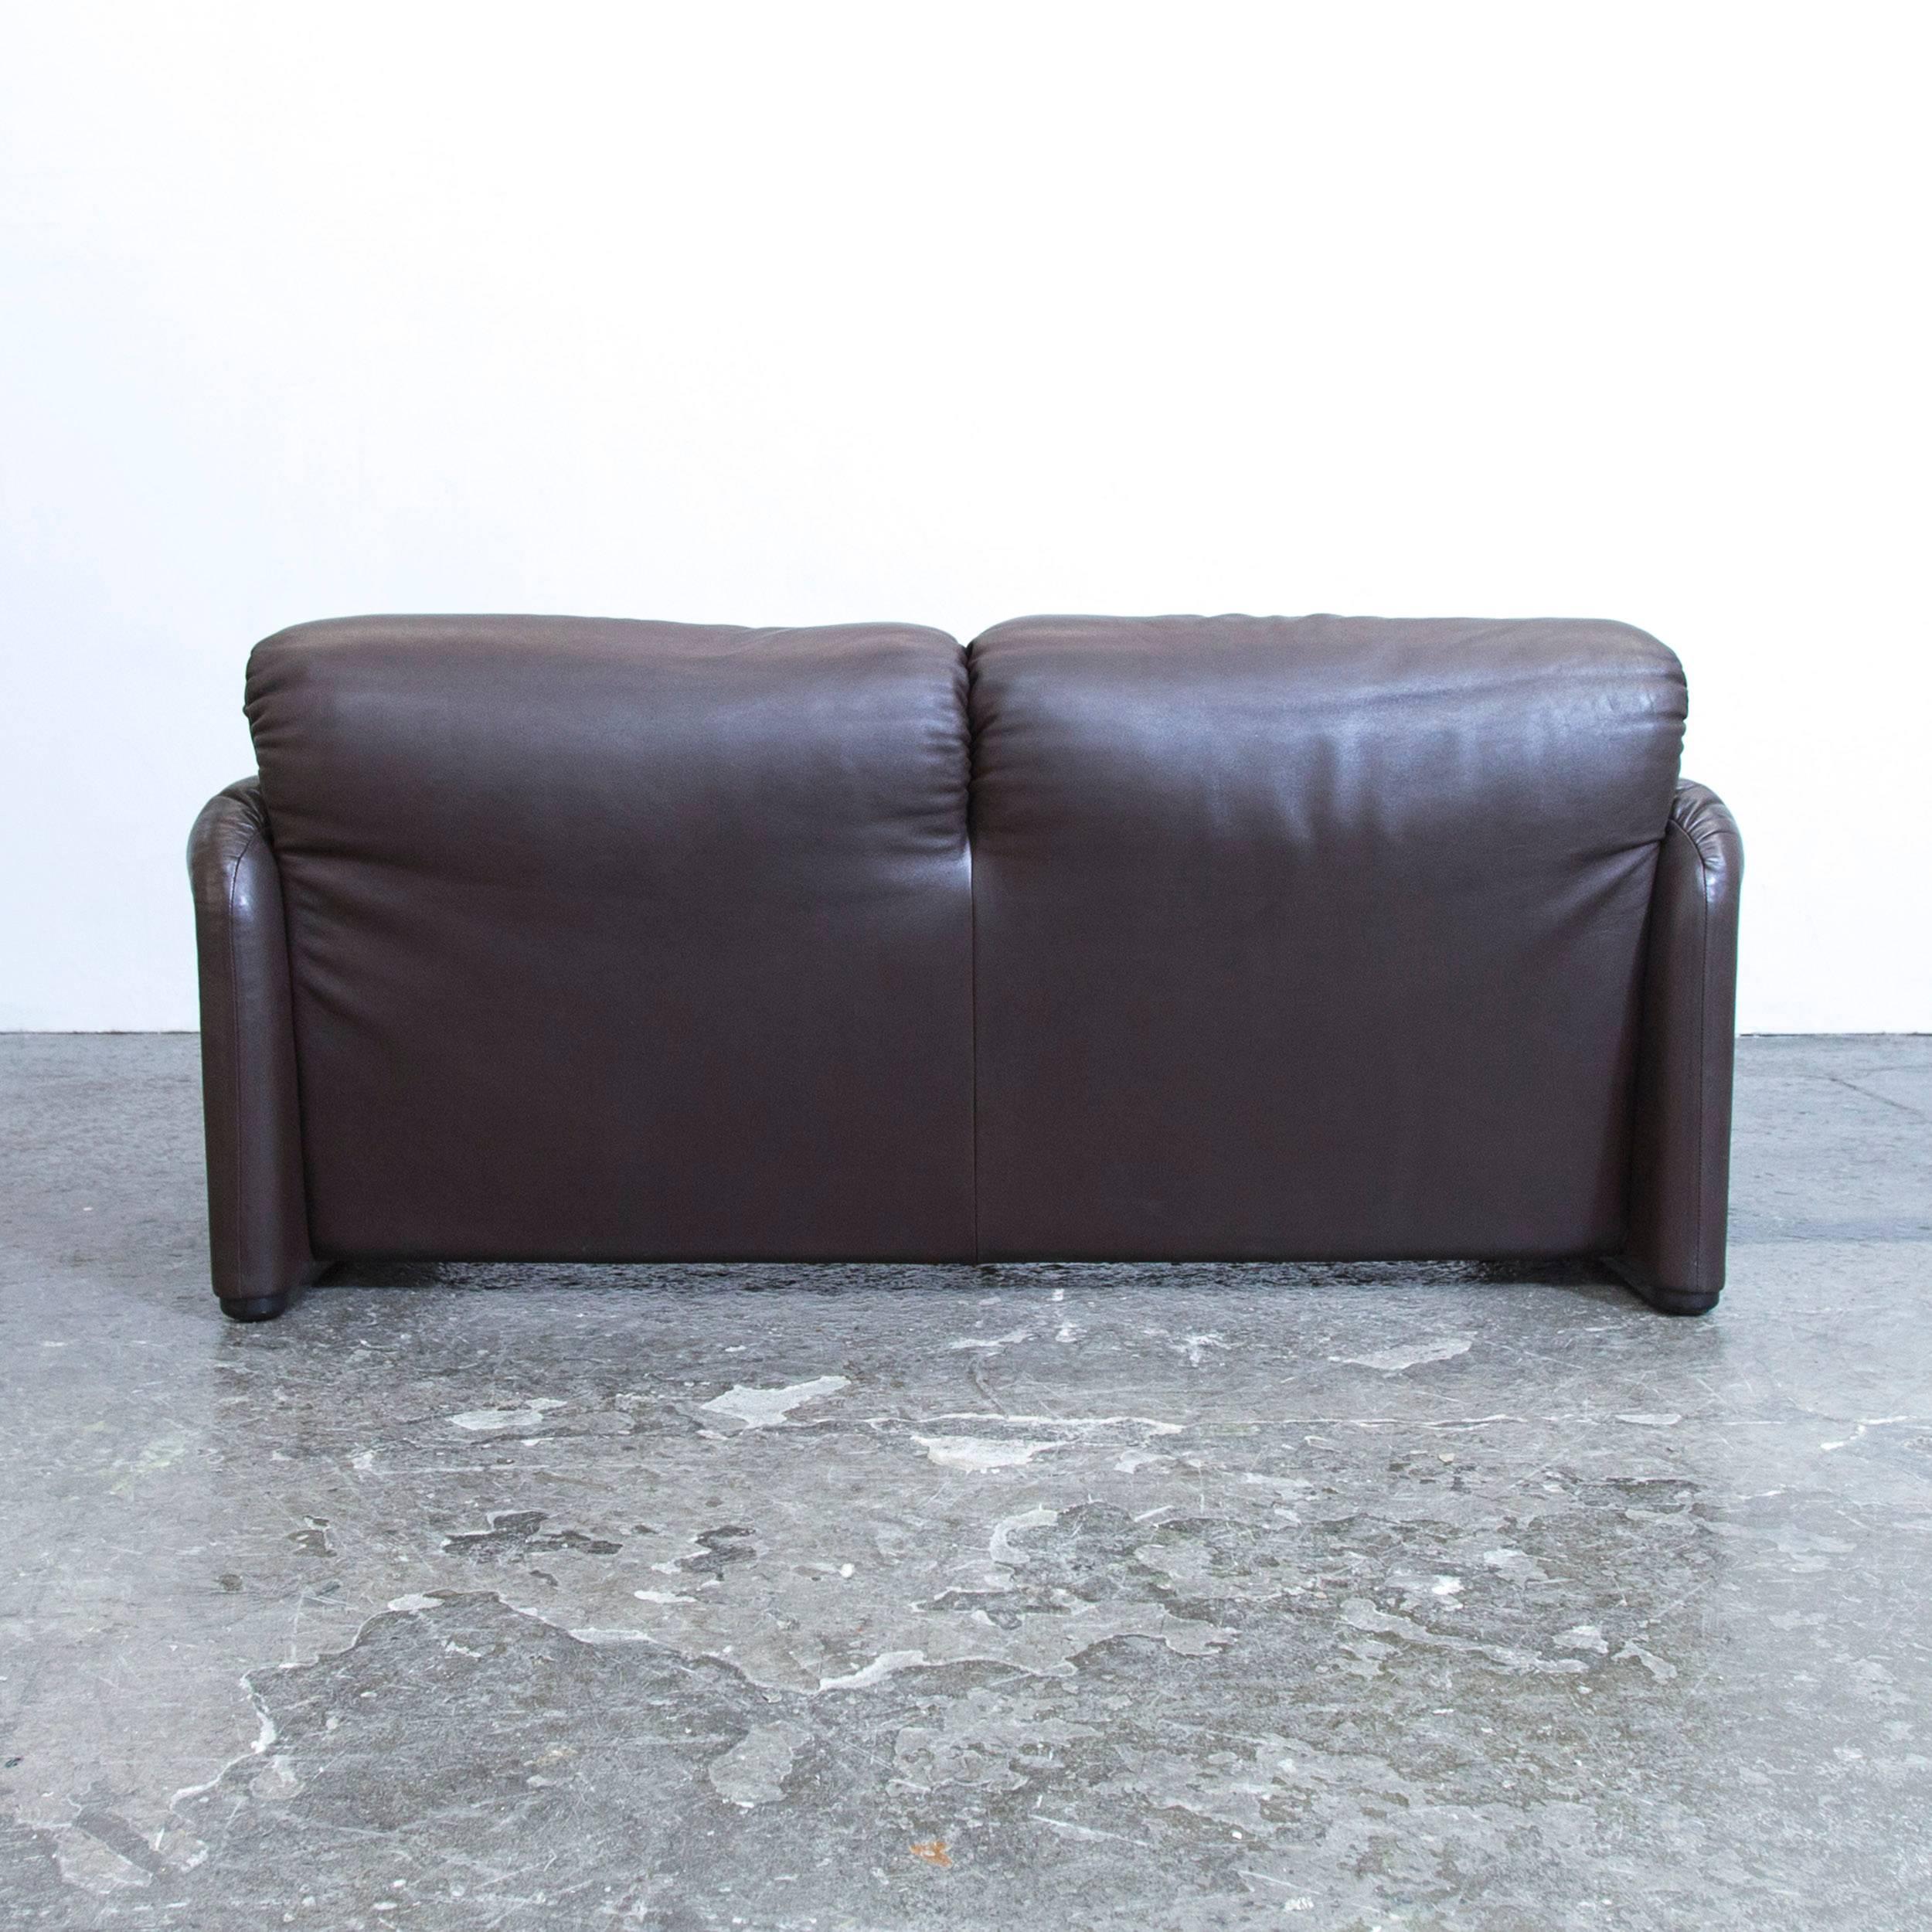 Cassina Maralunga Designer Sofa Mocca Brown Leather Two-Seat Function Modern 5